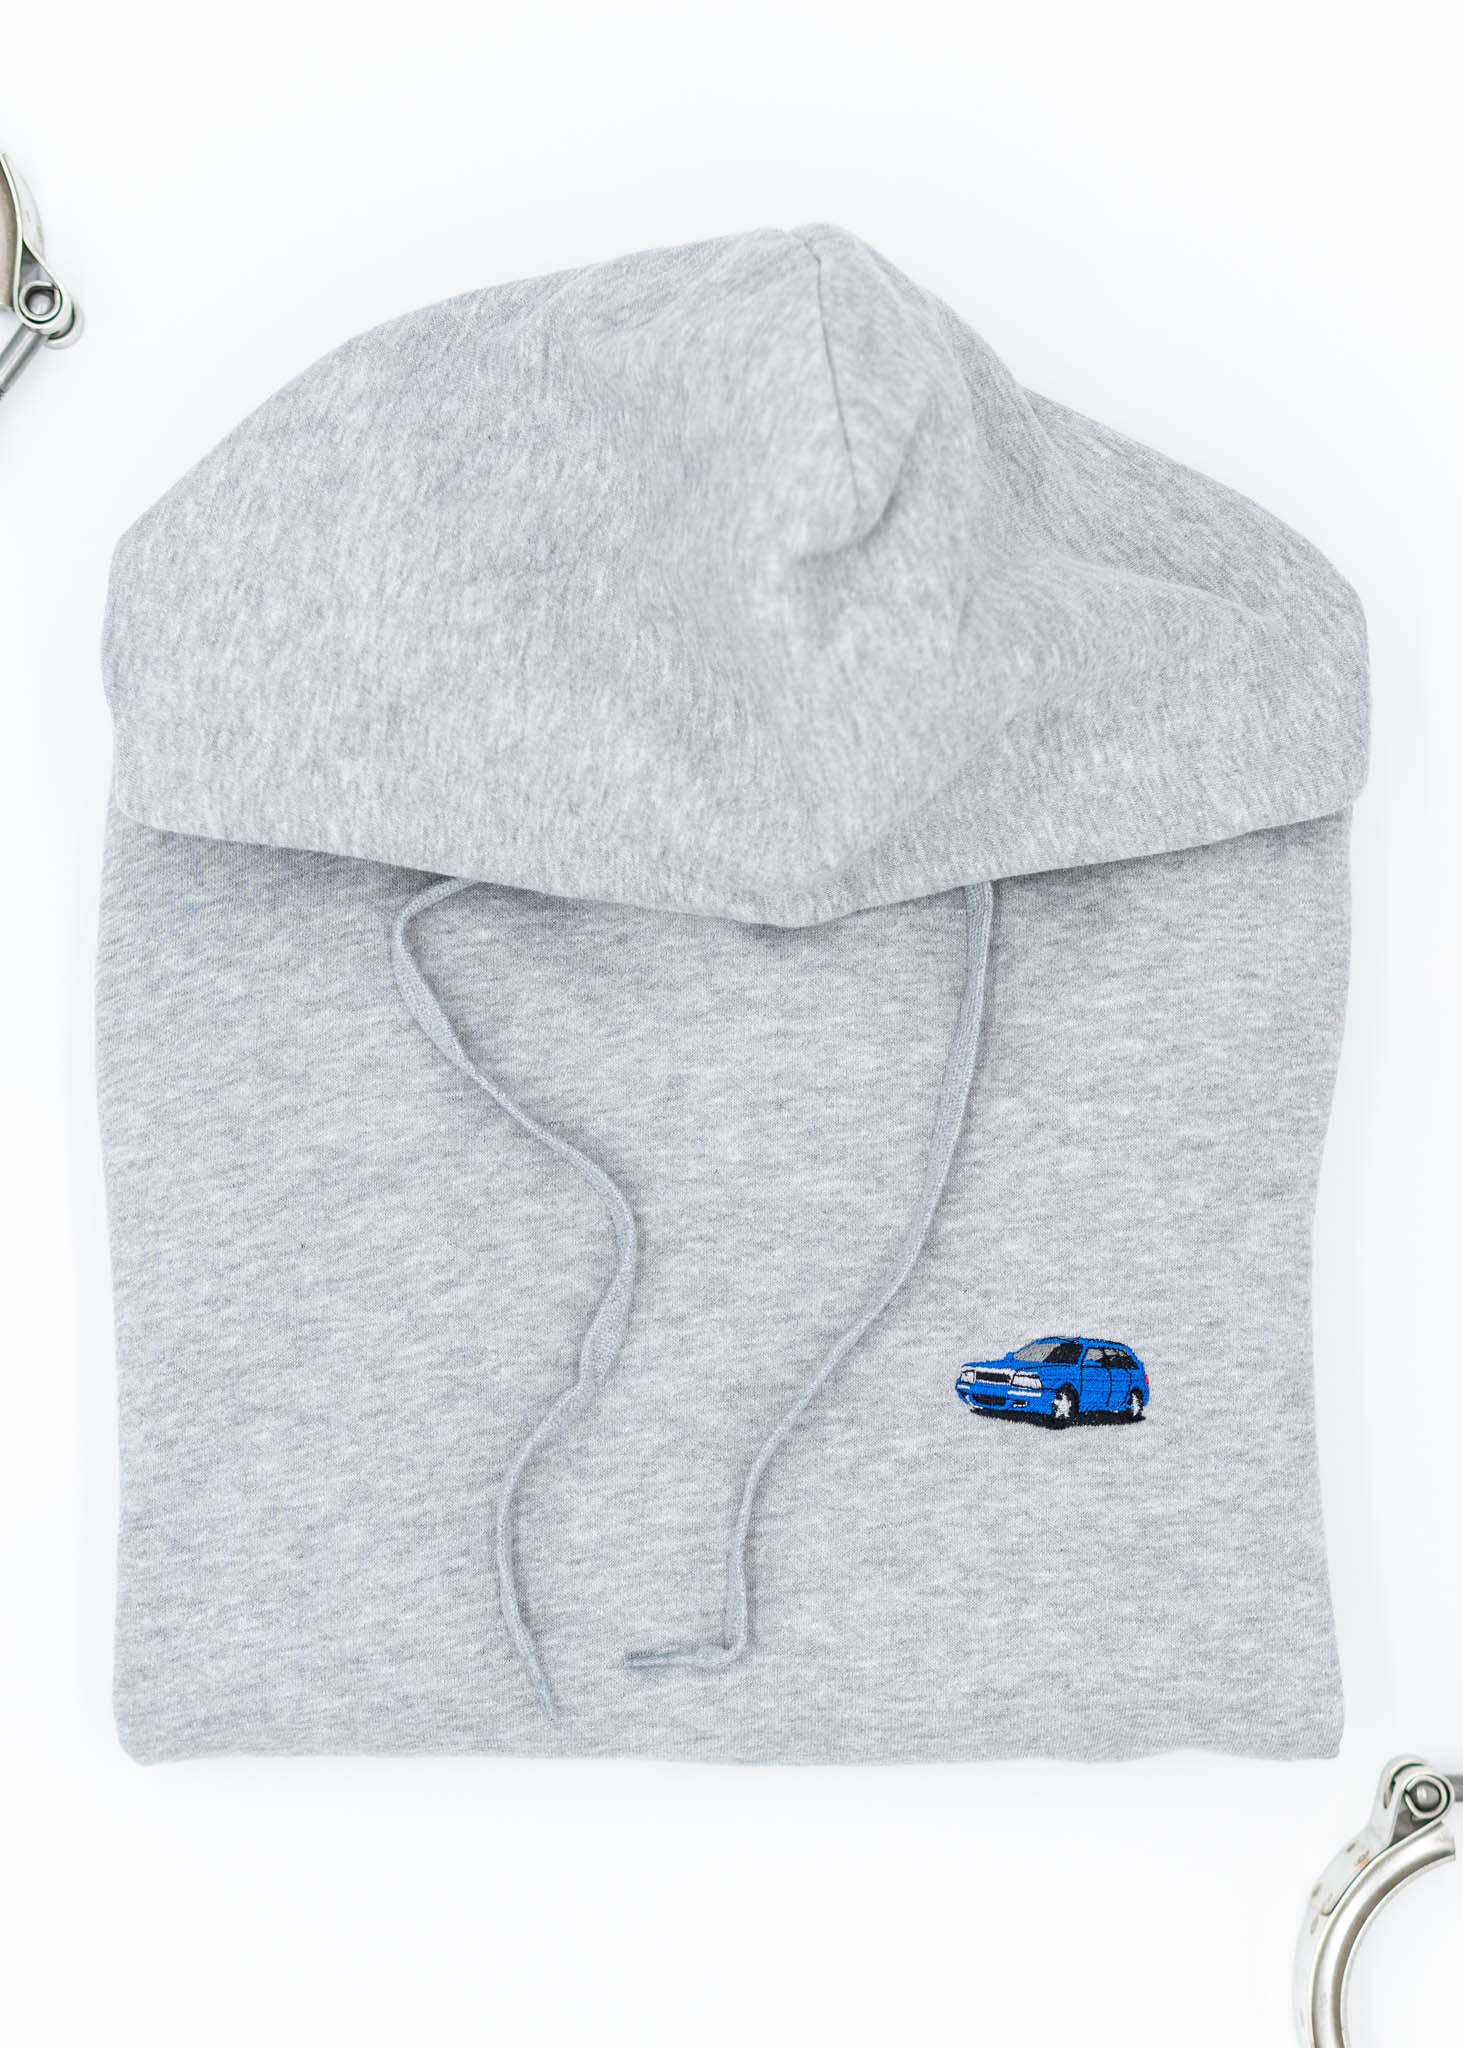 A grey Audi unisex hoodie for men and women. Photo is a front view of the sweater with an embroidered Nogaro Blue Audi 80 RS2 Avant made by Porsche. Fabric composition is cotton, polyester, and rayon. The material is very soft, stretchy, and non-transparent. The style of this hoodie is long sleeve, crewneck with a hood, hooded, with embroidery on the left chest.